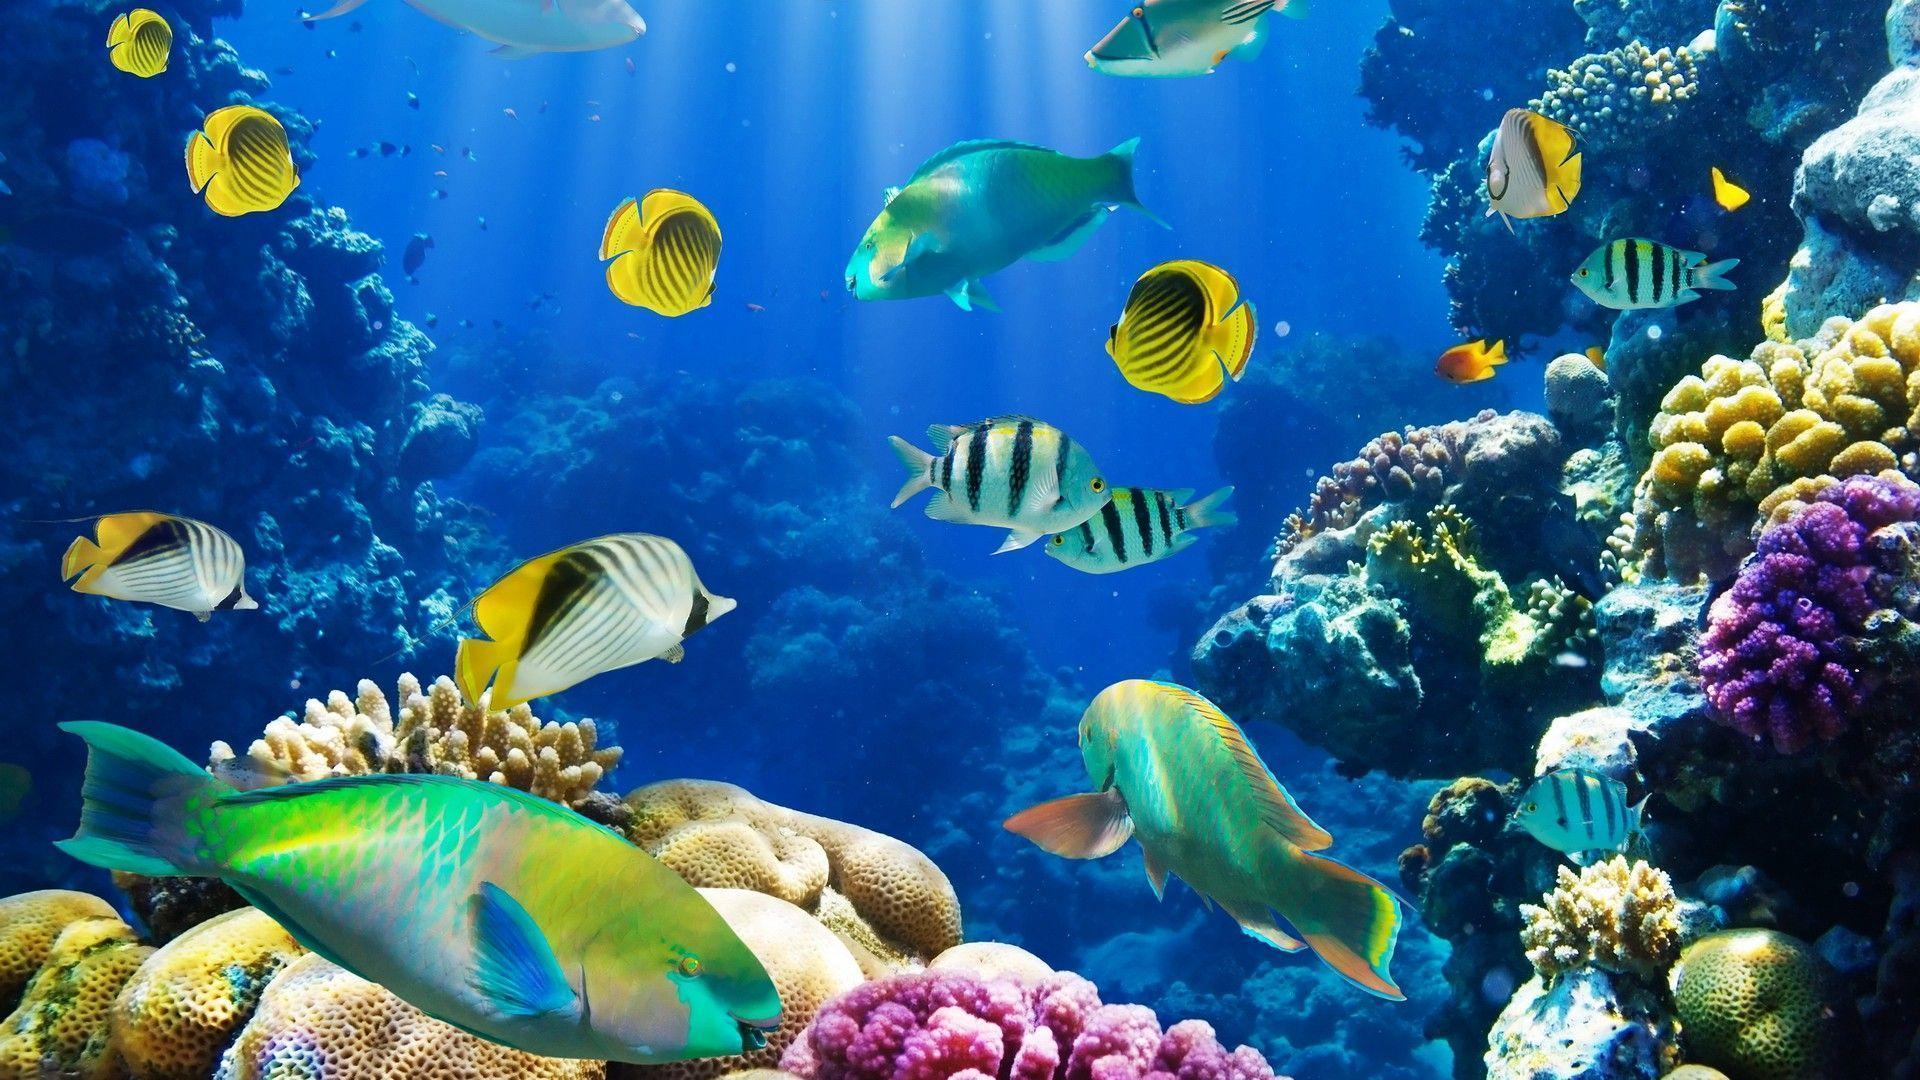 Live Fish Background, wallpaper, Live Fish Background HD